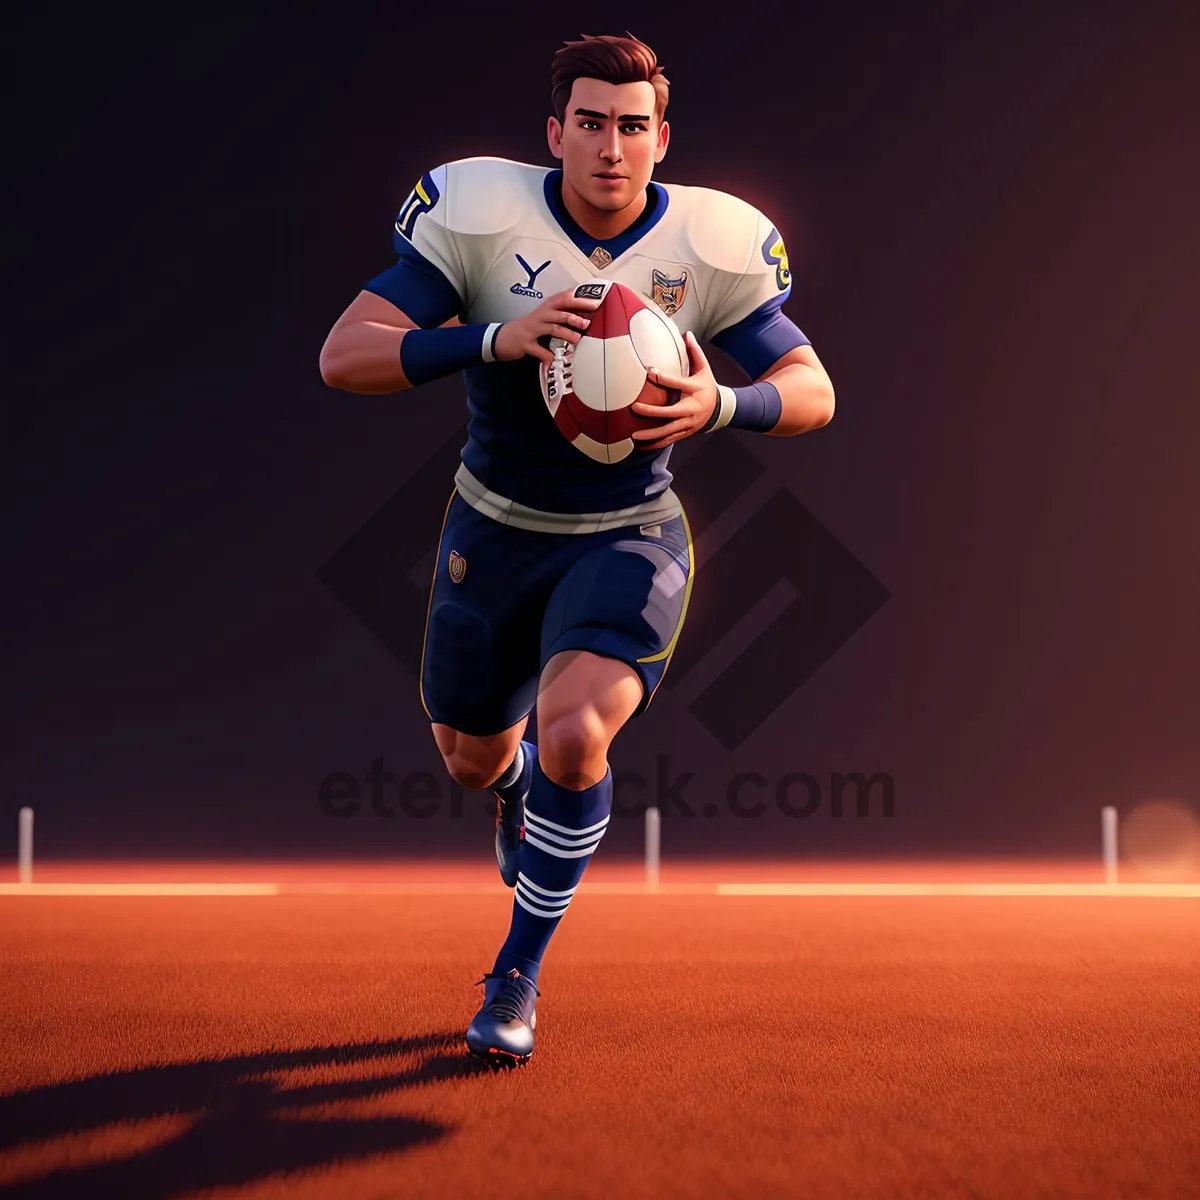 Picture of Active Runner in Competitive Sports Game